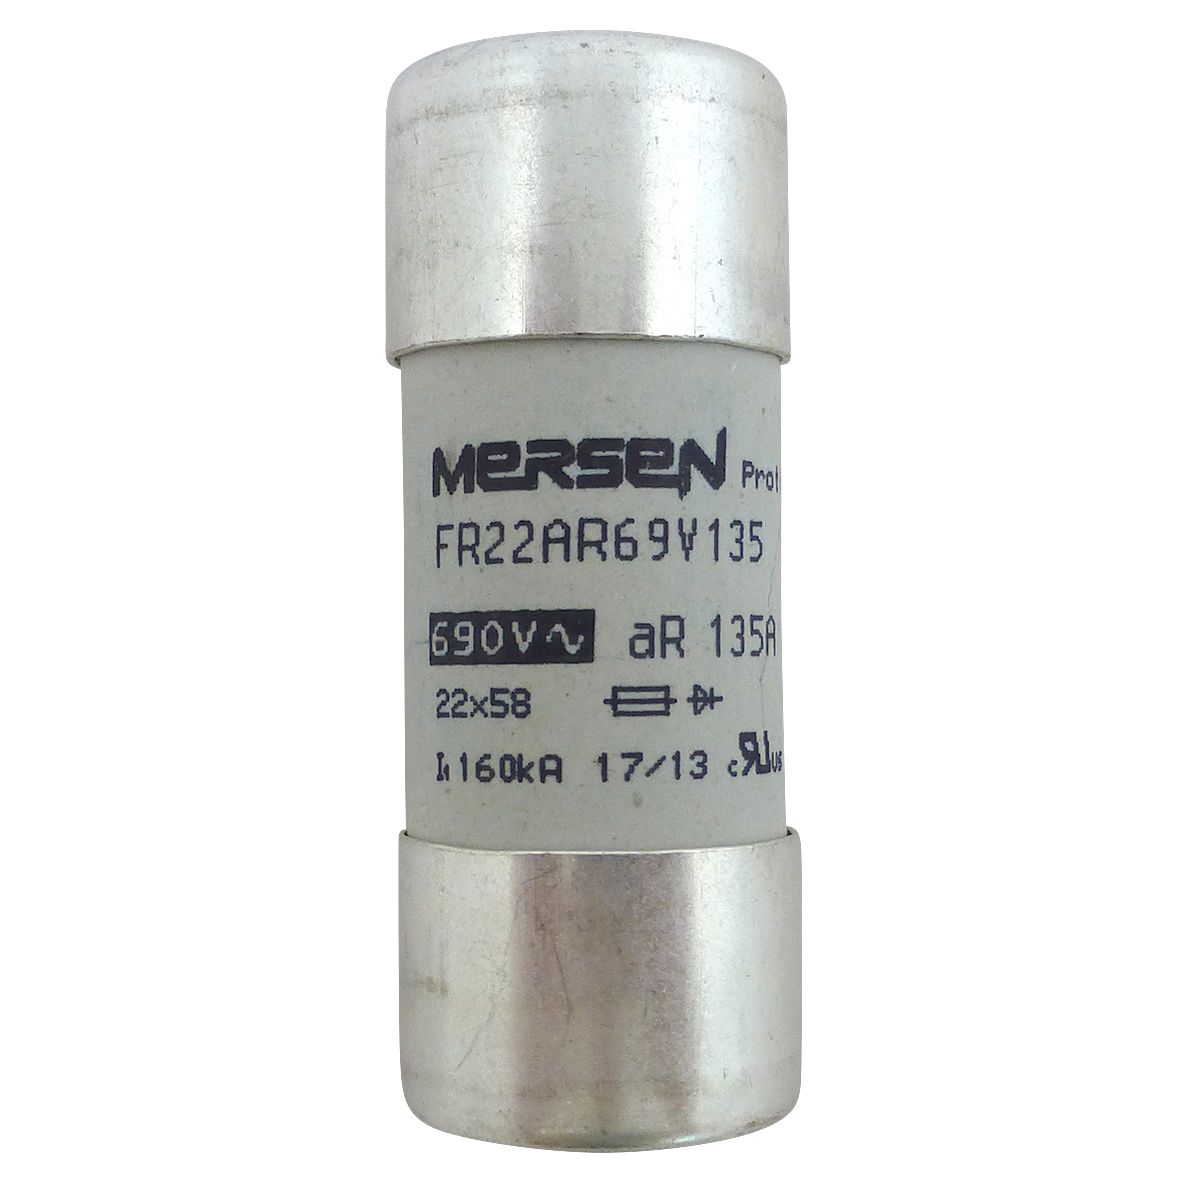 G1027324 - Cylindrical fuse-link aR 690VAC 22x58, 135A, without indicator